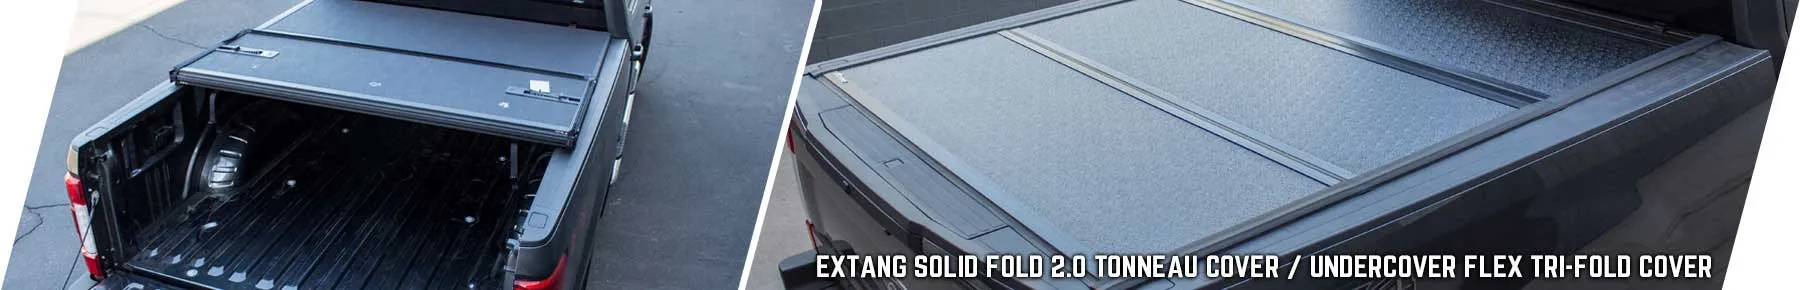 Extang-Solid-Fold-2.0-Tonneau-Cover-Undercover-Flex-Tri-Fold-Cover